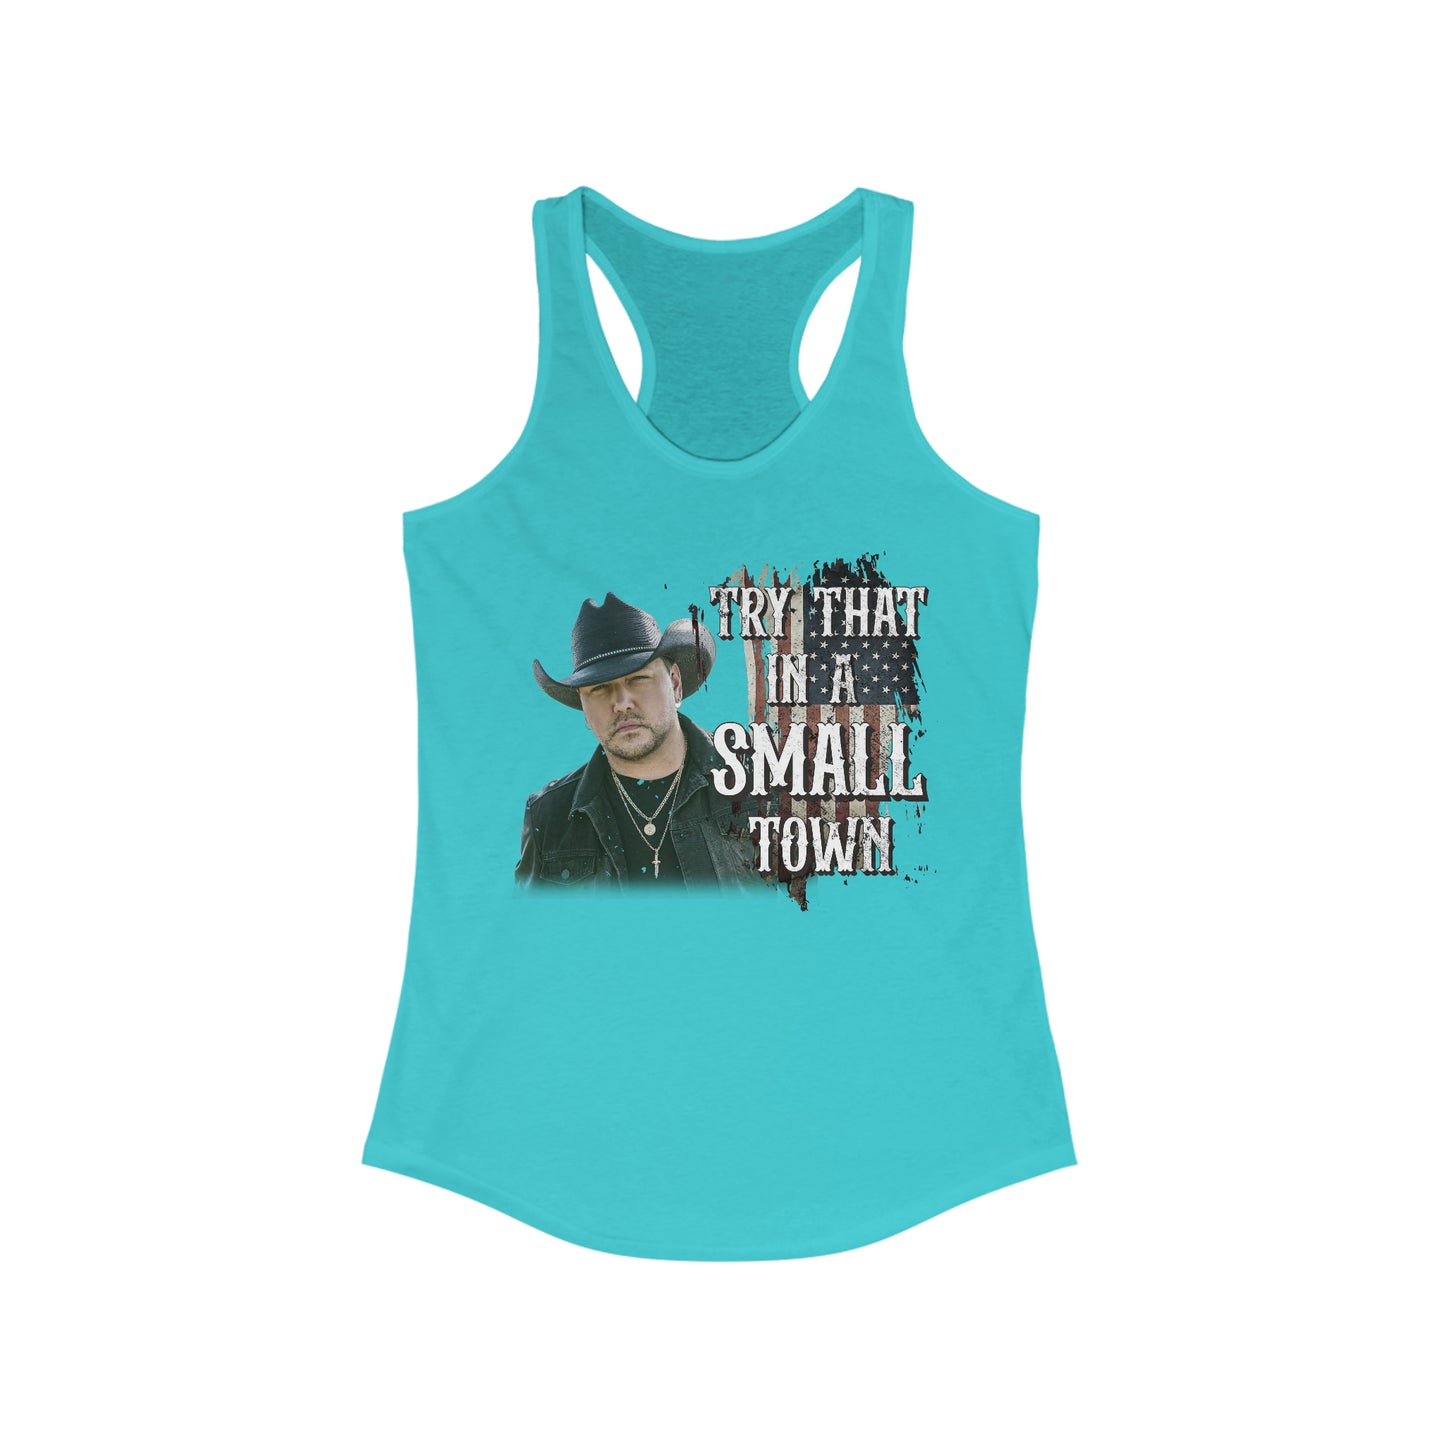 Try that in a small town Jason Aldean Women's Ideal Racerback Tank - XS / Solid Tahiti Blue - S / Solid Tahiti Blue - M / Solid Tahiti Blue - L / Solid Tahiti Blue - XL / Solid Tahiti Blue - 2XL / Solid Tahiti Blue